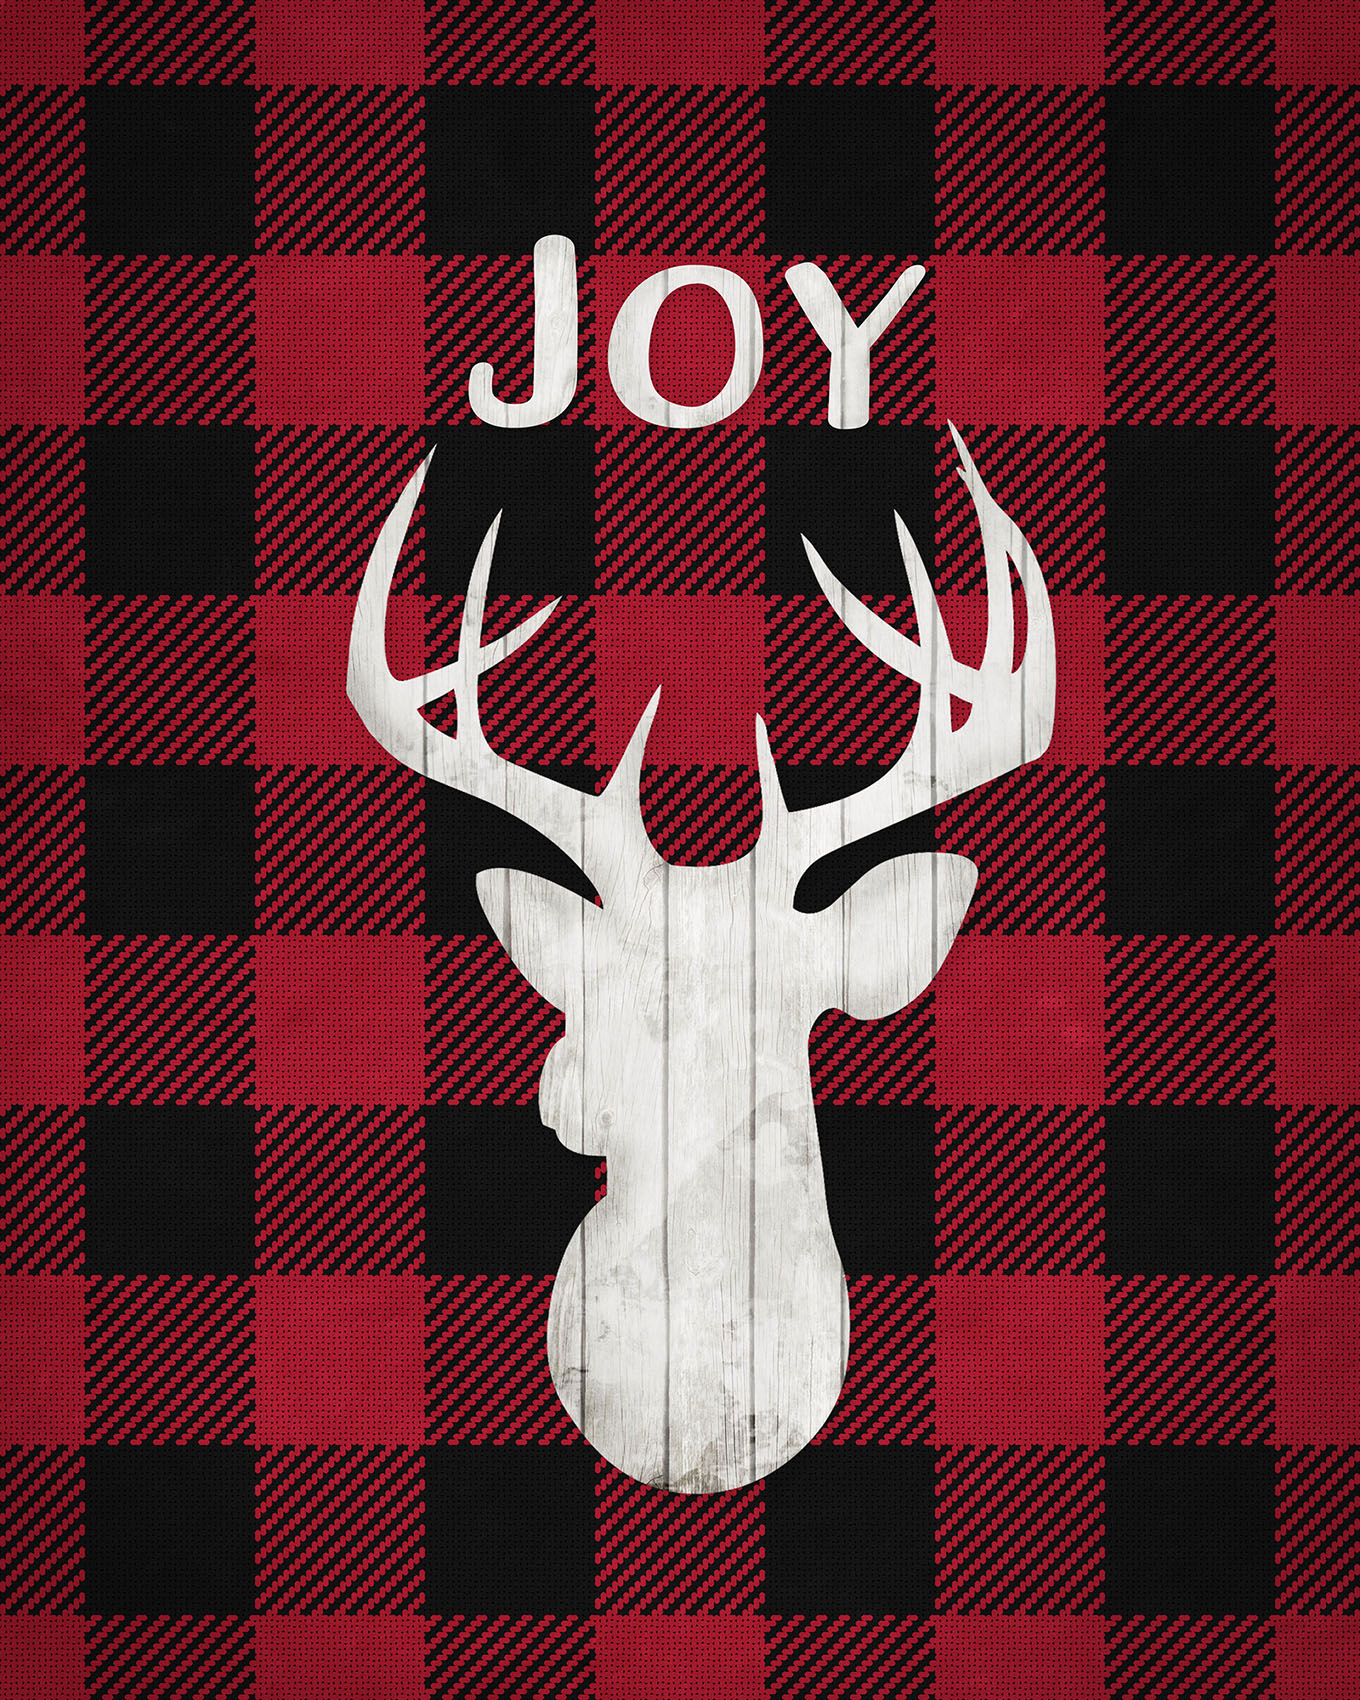 Add a little rustic, outdoorsy flair to your holiday decor and gift wrapping with these free buffalo check plaid Christmas printables.